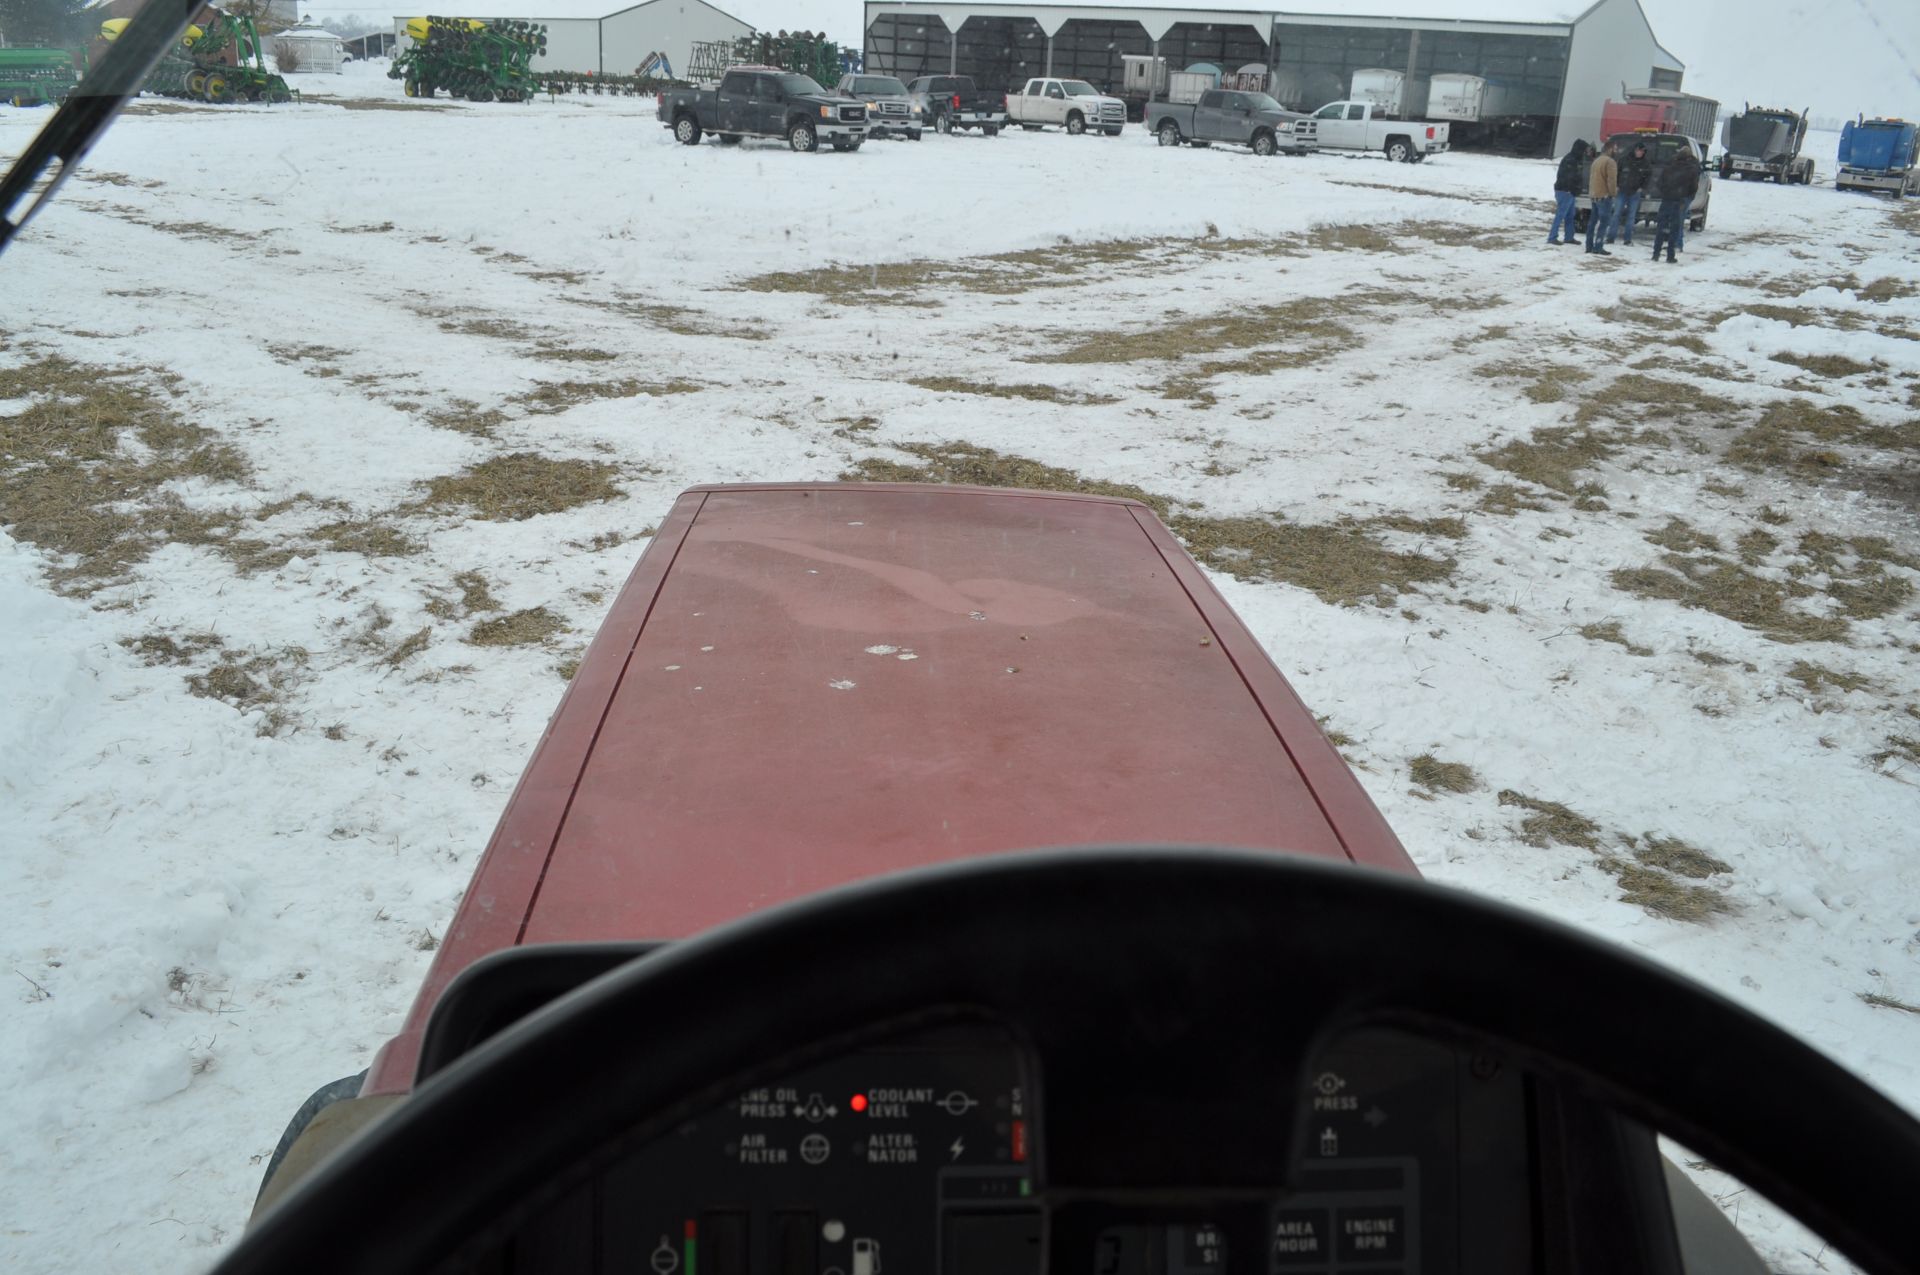 Case IH 7120 tractor, 2WD, power shift, 18.4 R 42 tires, 540/1000 PTO, 3 hyd remotes, 3 pt, shows - Image 36 of 37